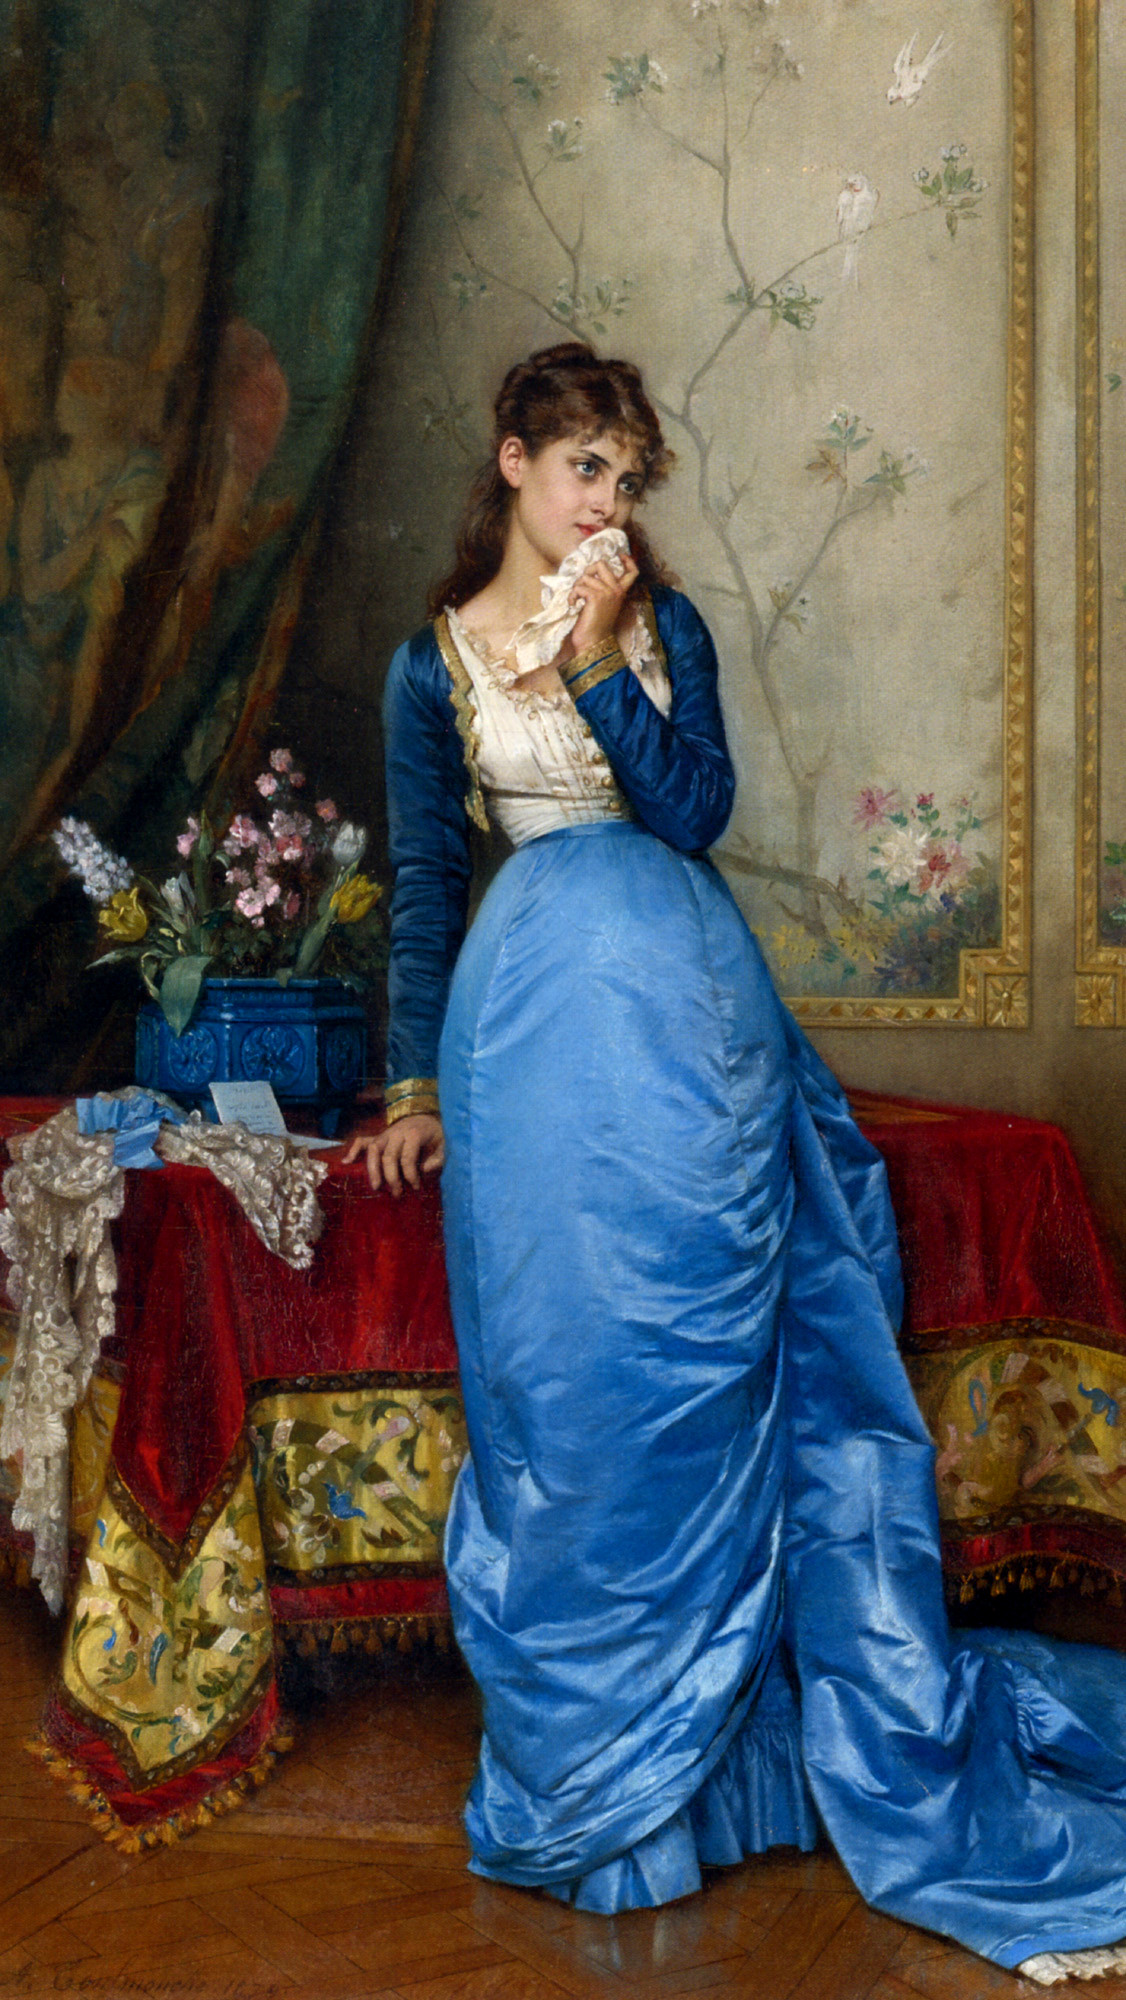 The Letter by Auguste Toulmouche, 1879